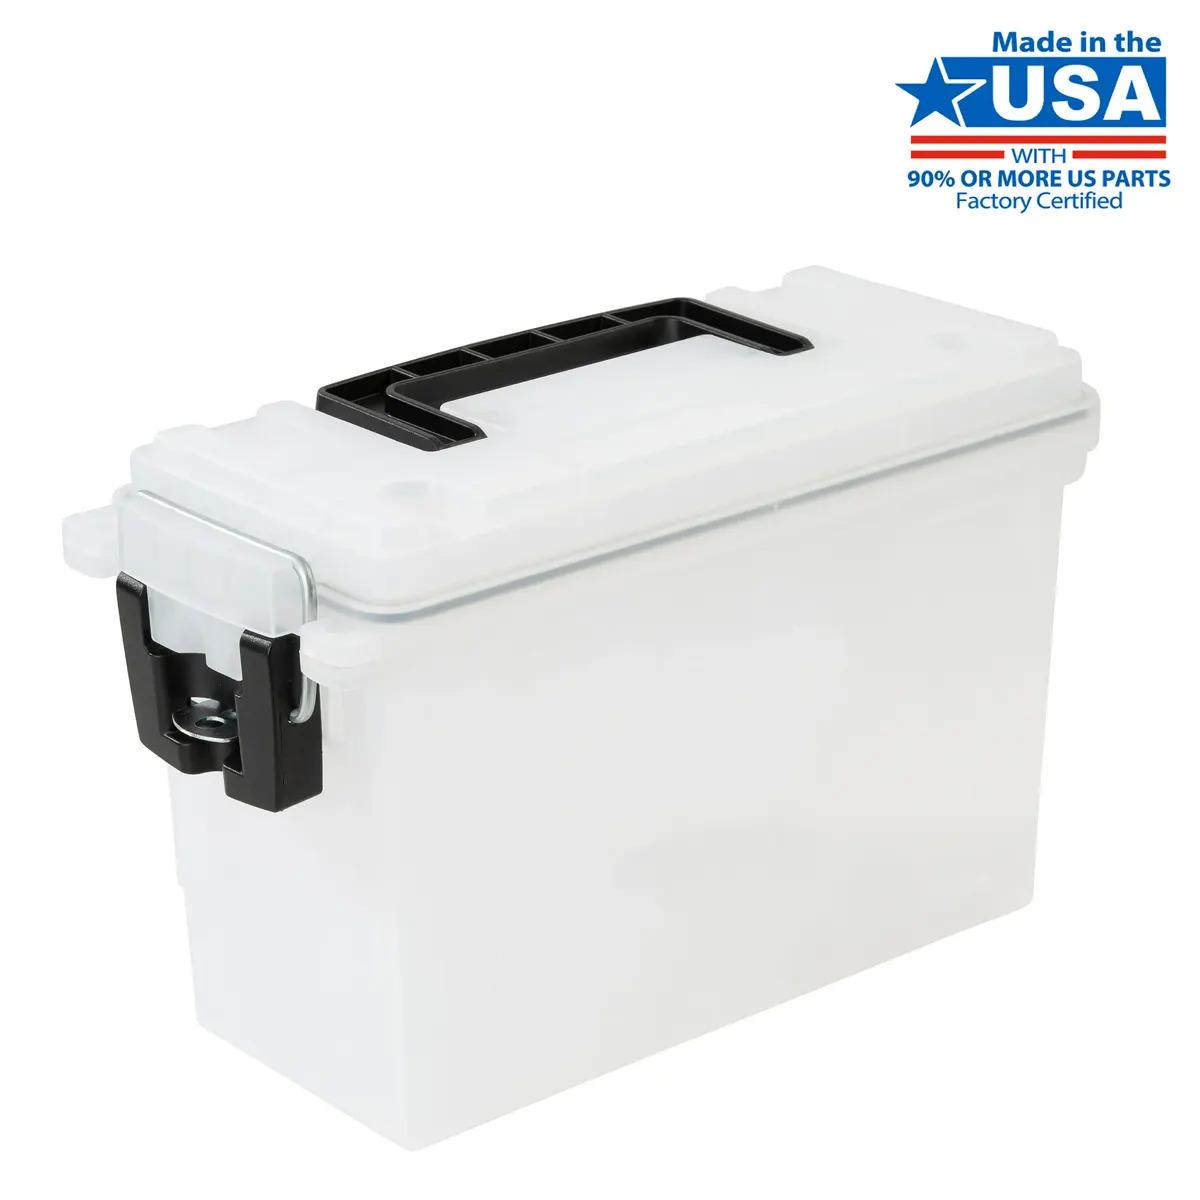 Hyper Tough Frost Locking and Stacking Utility Box for $6.88